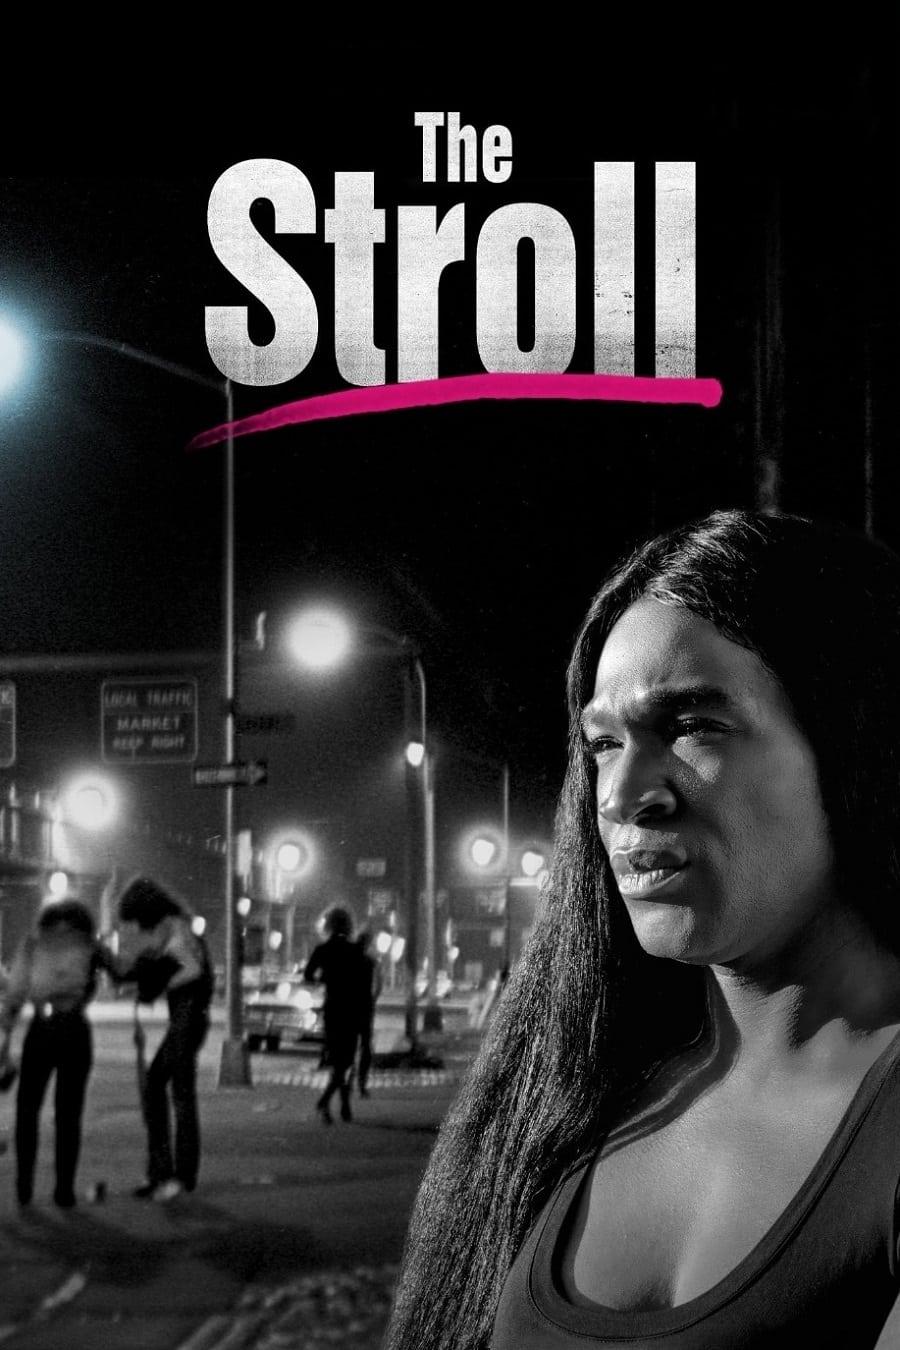 The Stroll poster